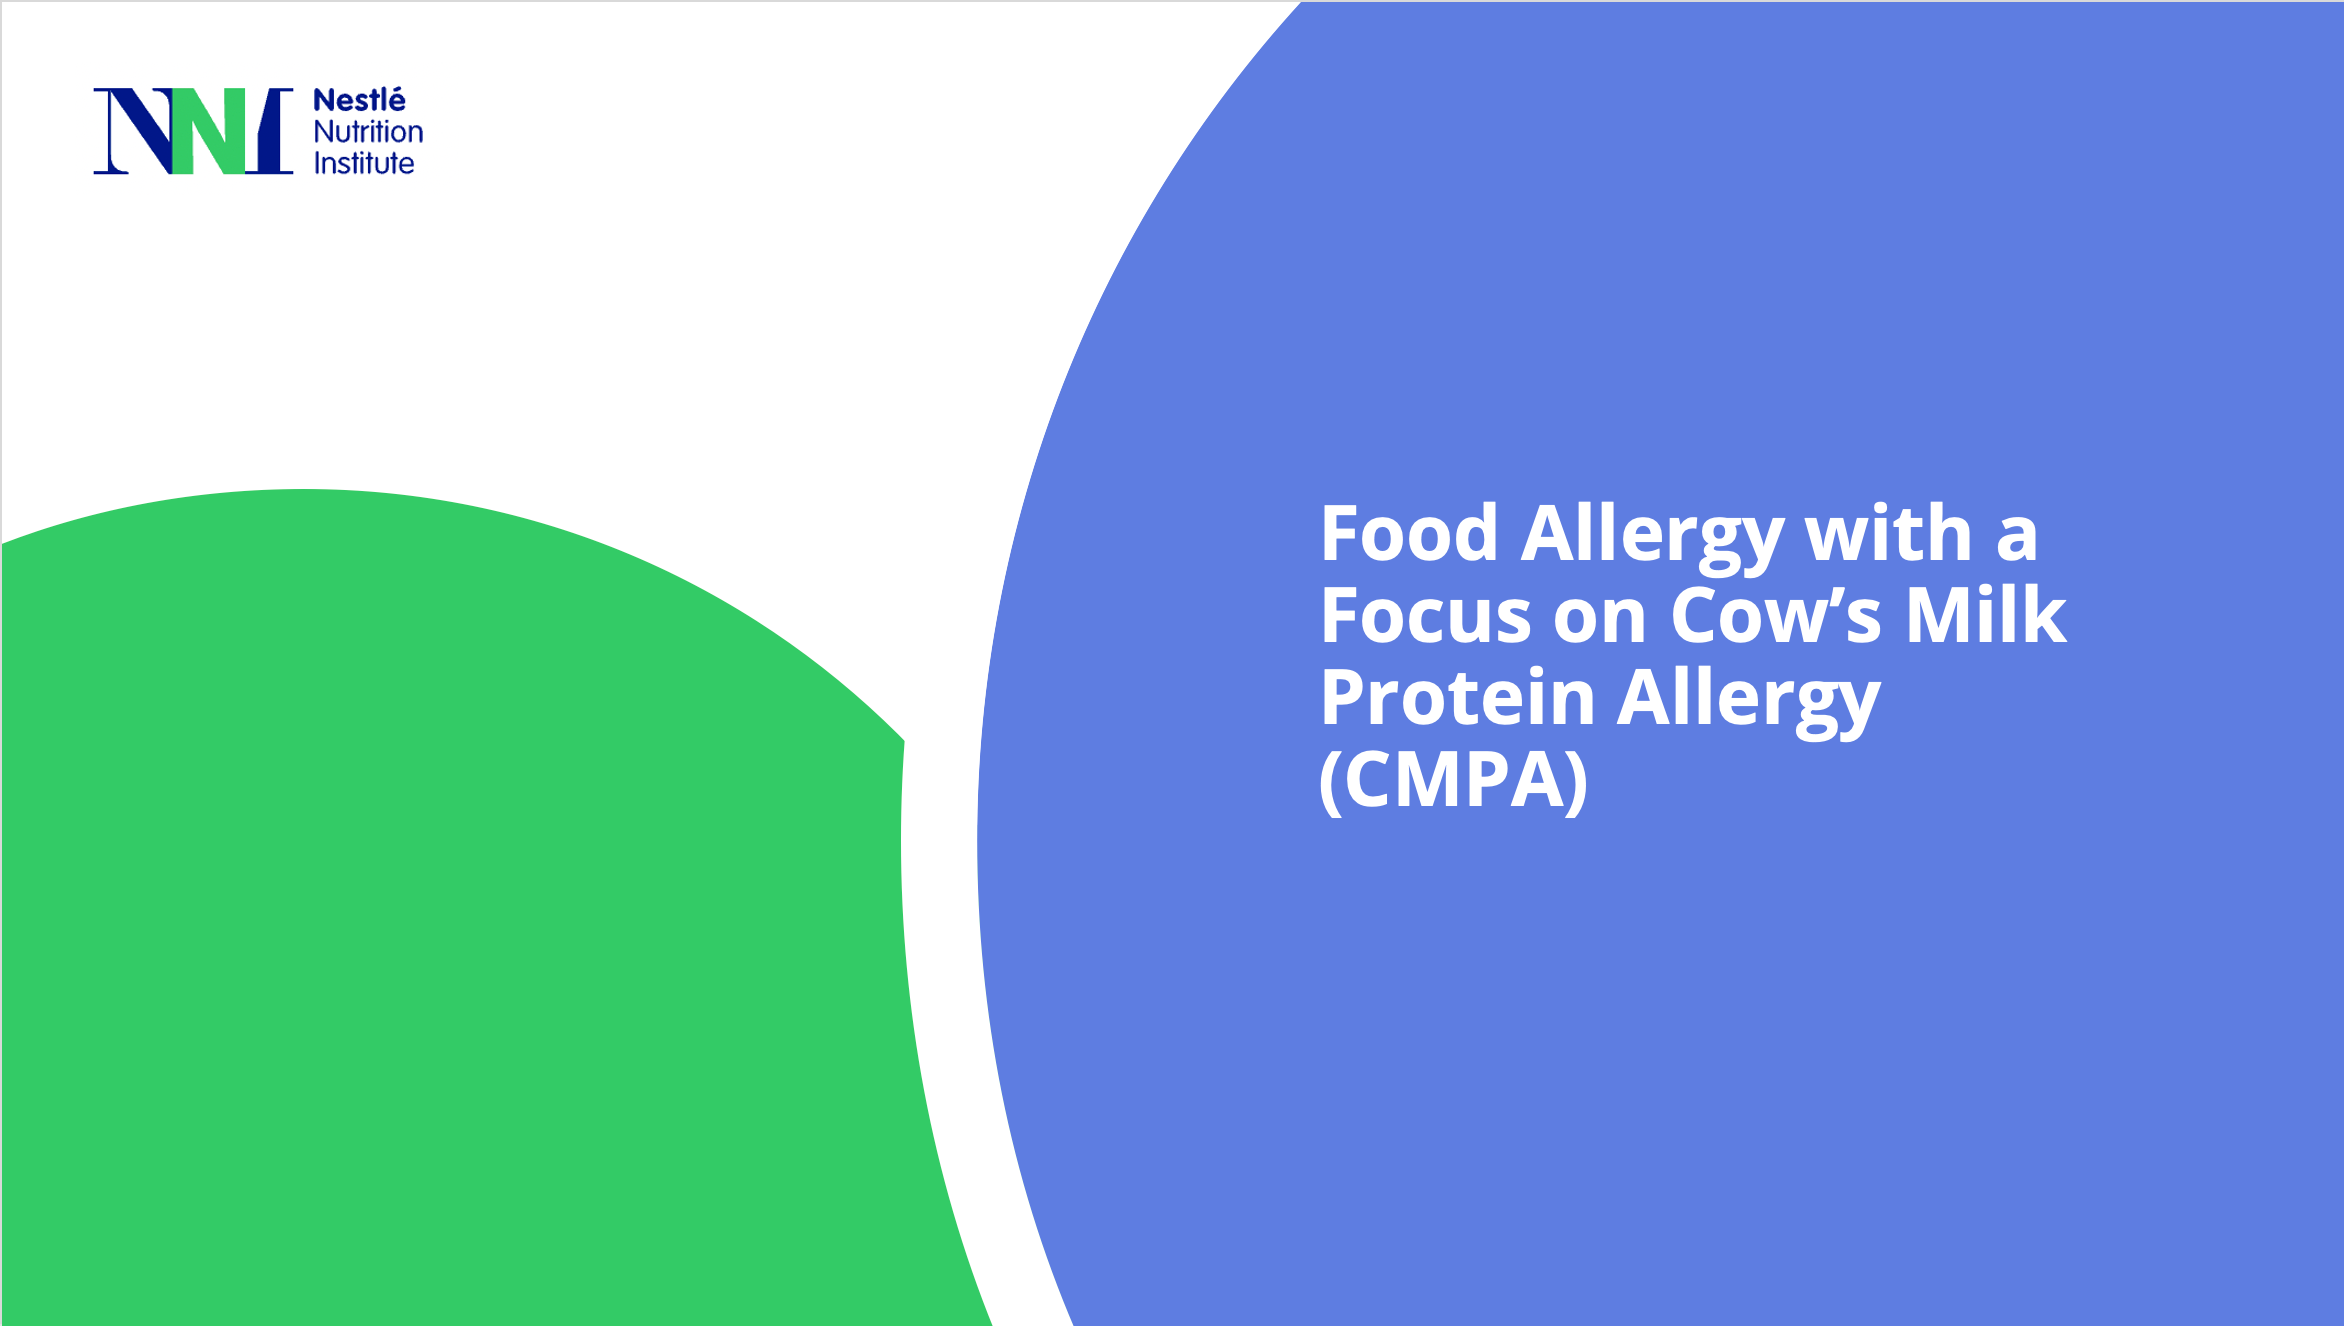 Food Allergy with a Focus on Cow’s Milk Protein Allergy – CMPA